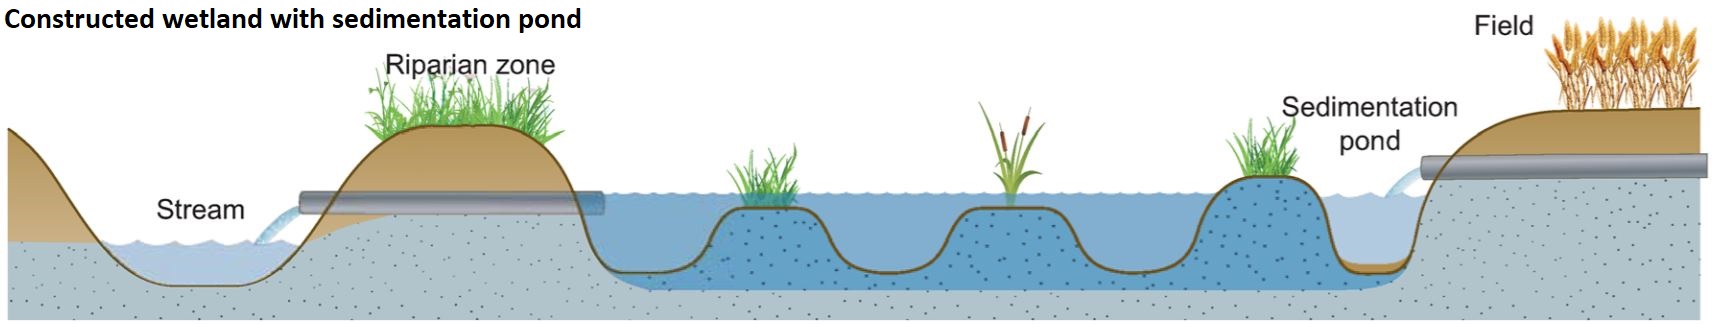 Schematic of a sediment pond and constructed wetland at the end of a field tile.